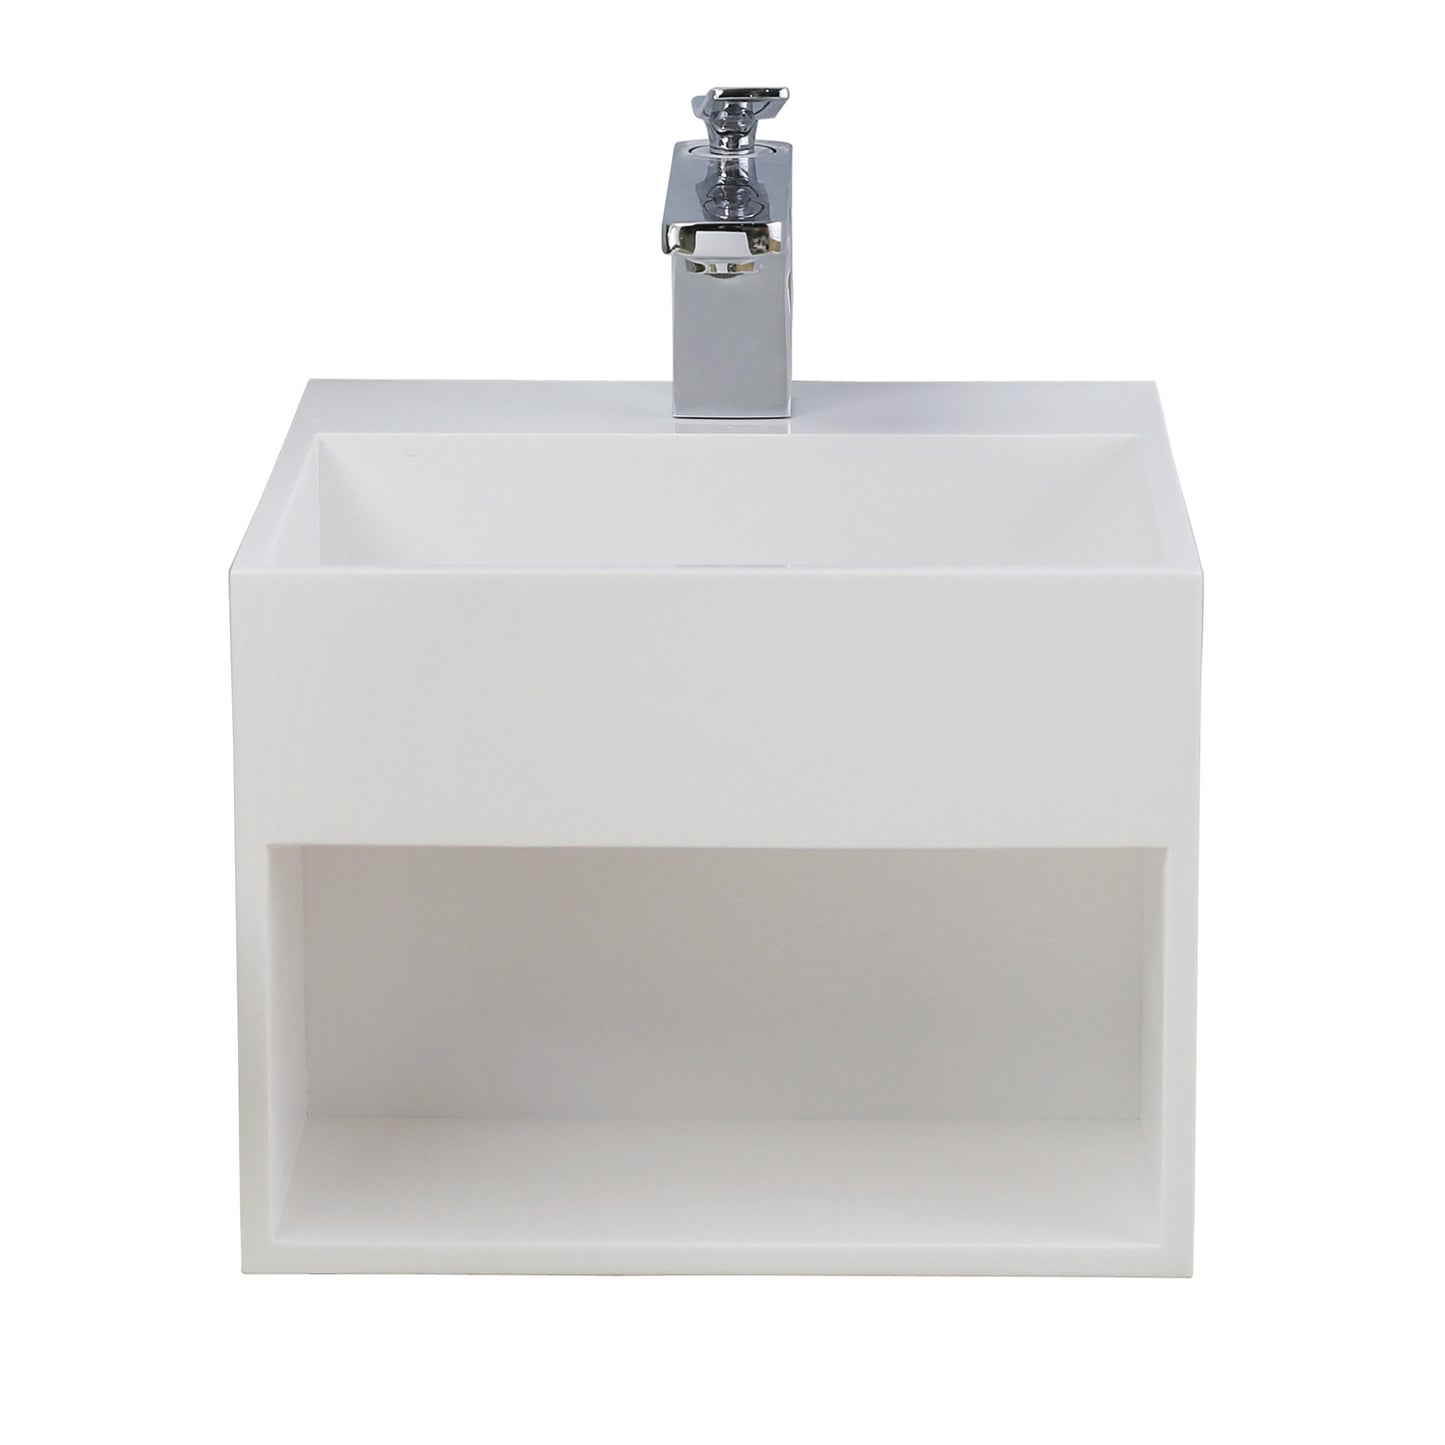 Sanders Resin Wall Hung Sink with Shelf Matte White with 1 Faucet Hole